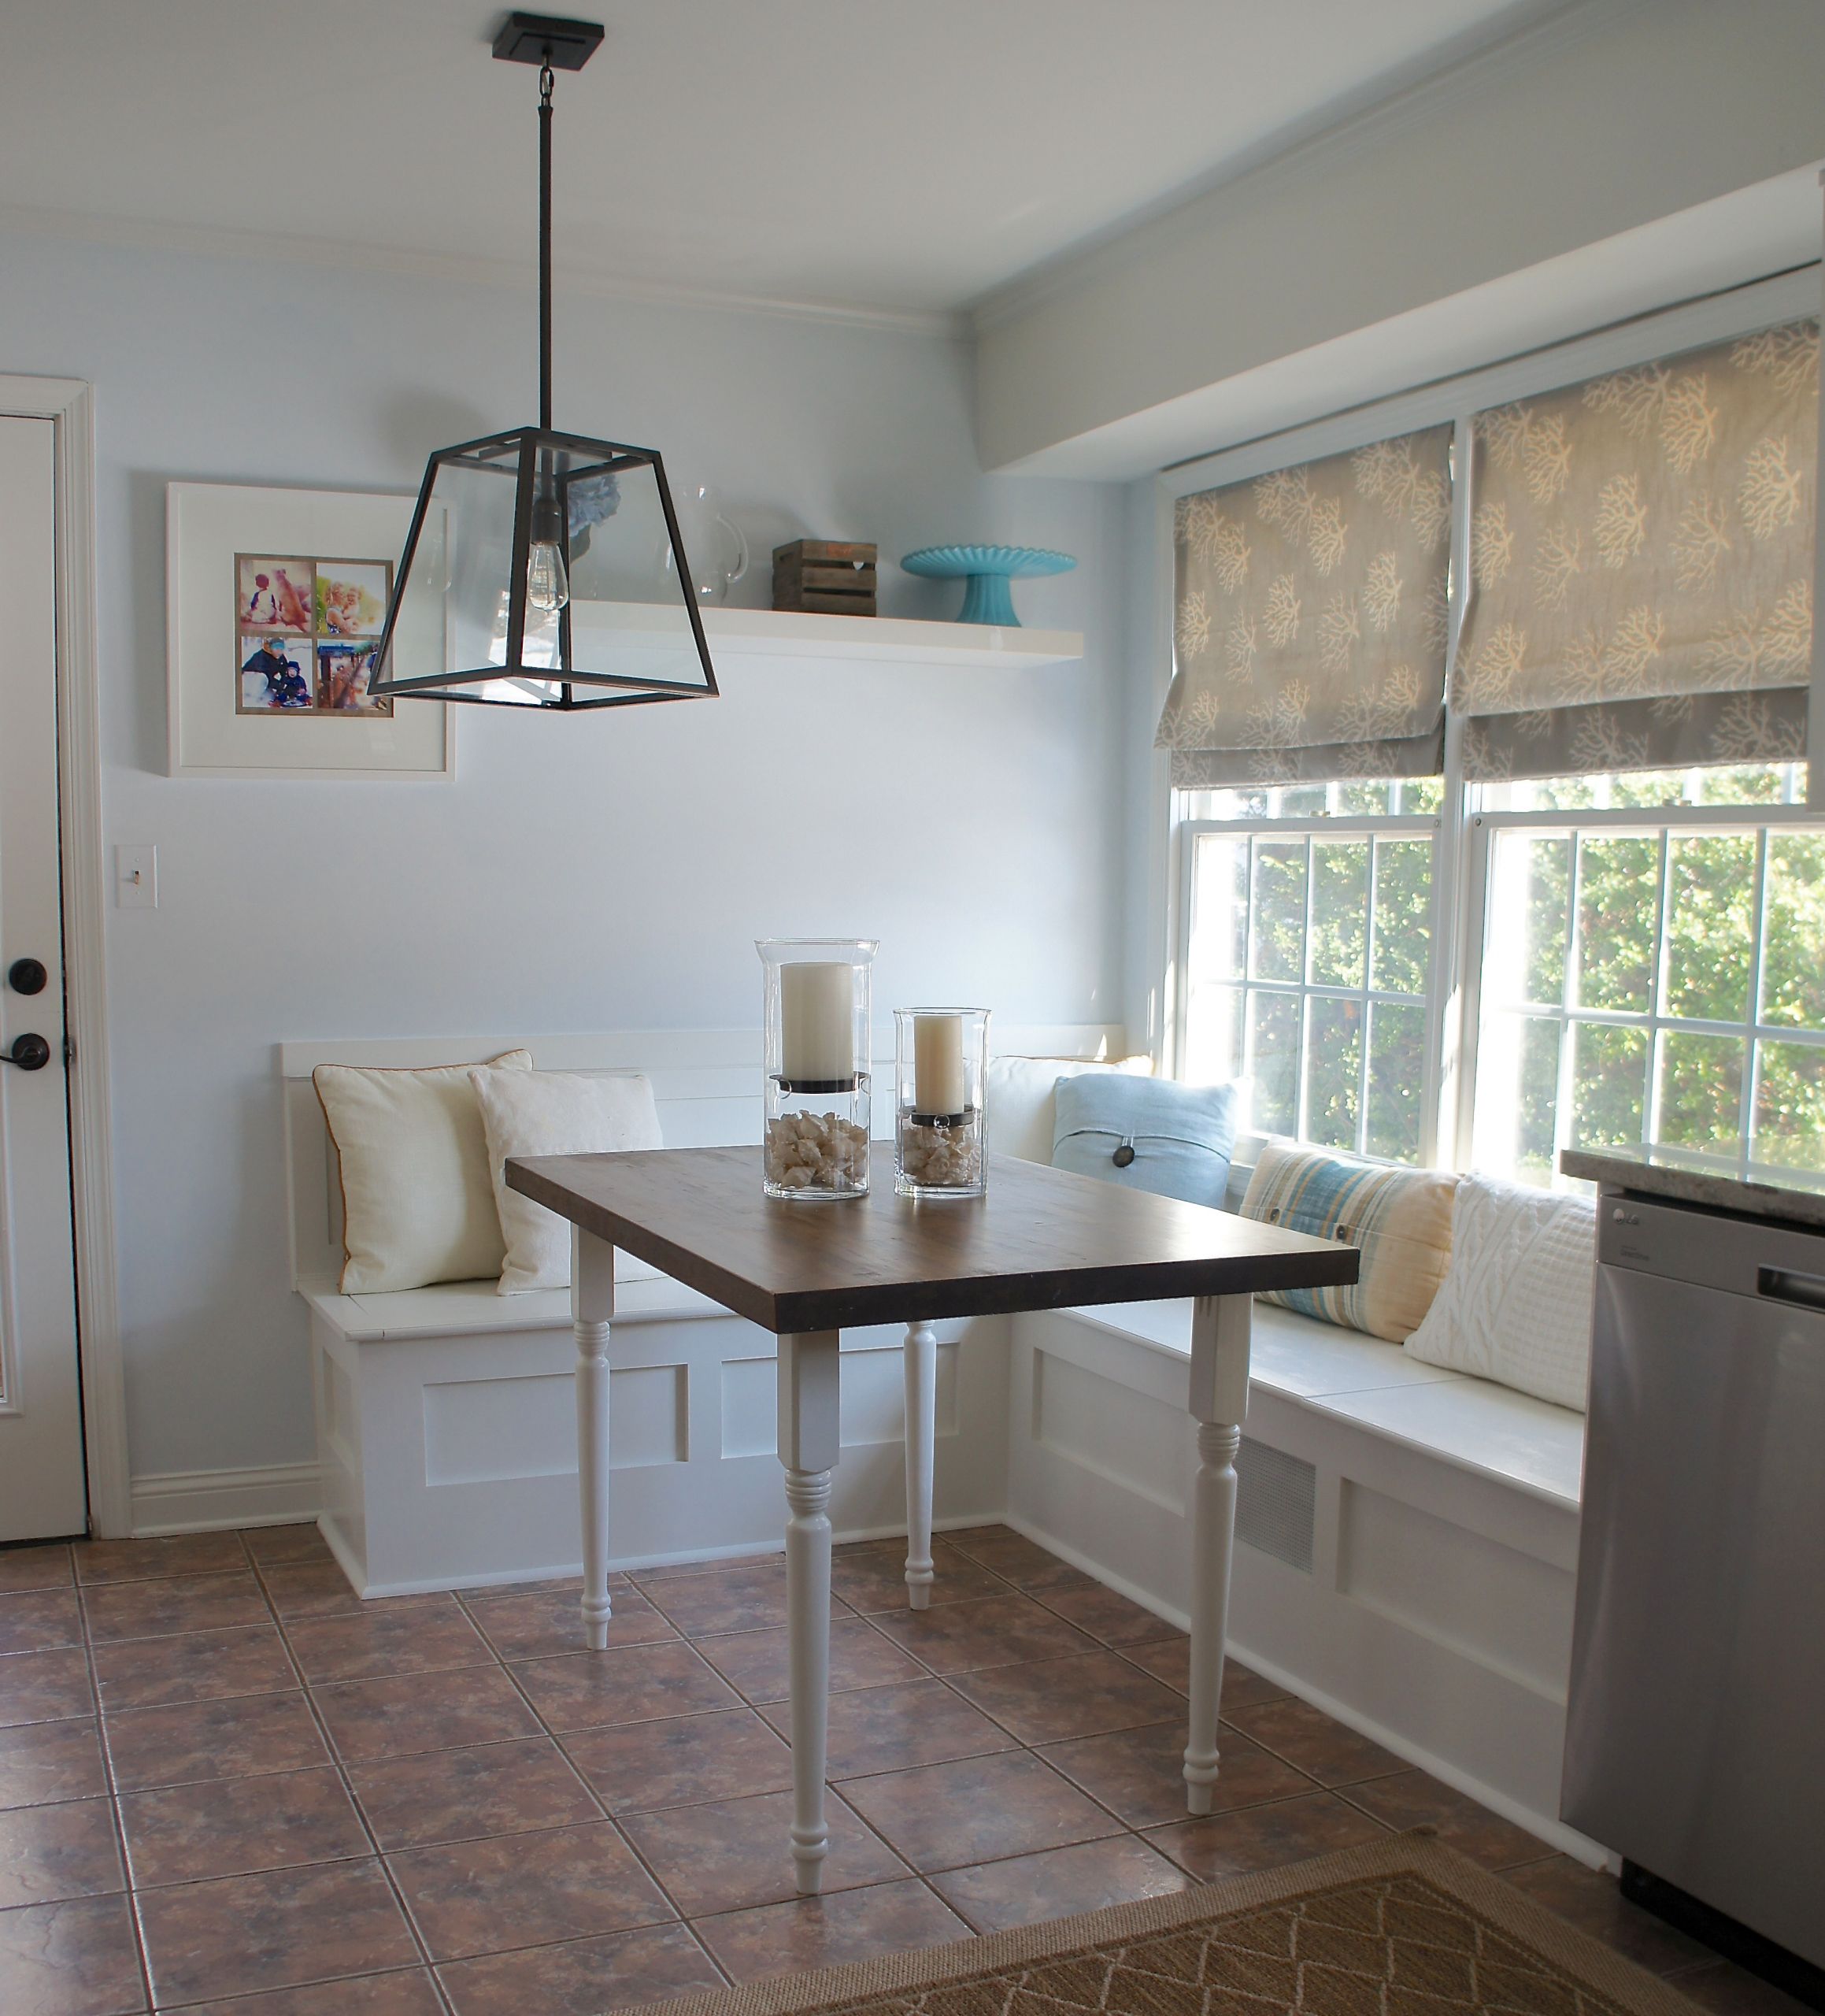 Space saving Kitchen Tables For Breakfast Nooks